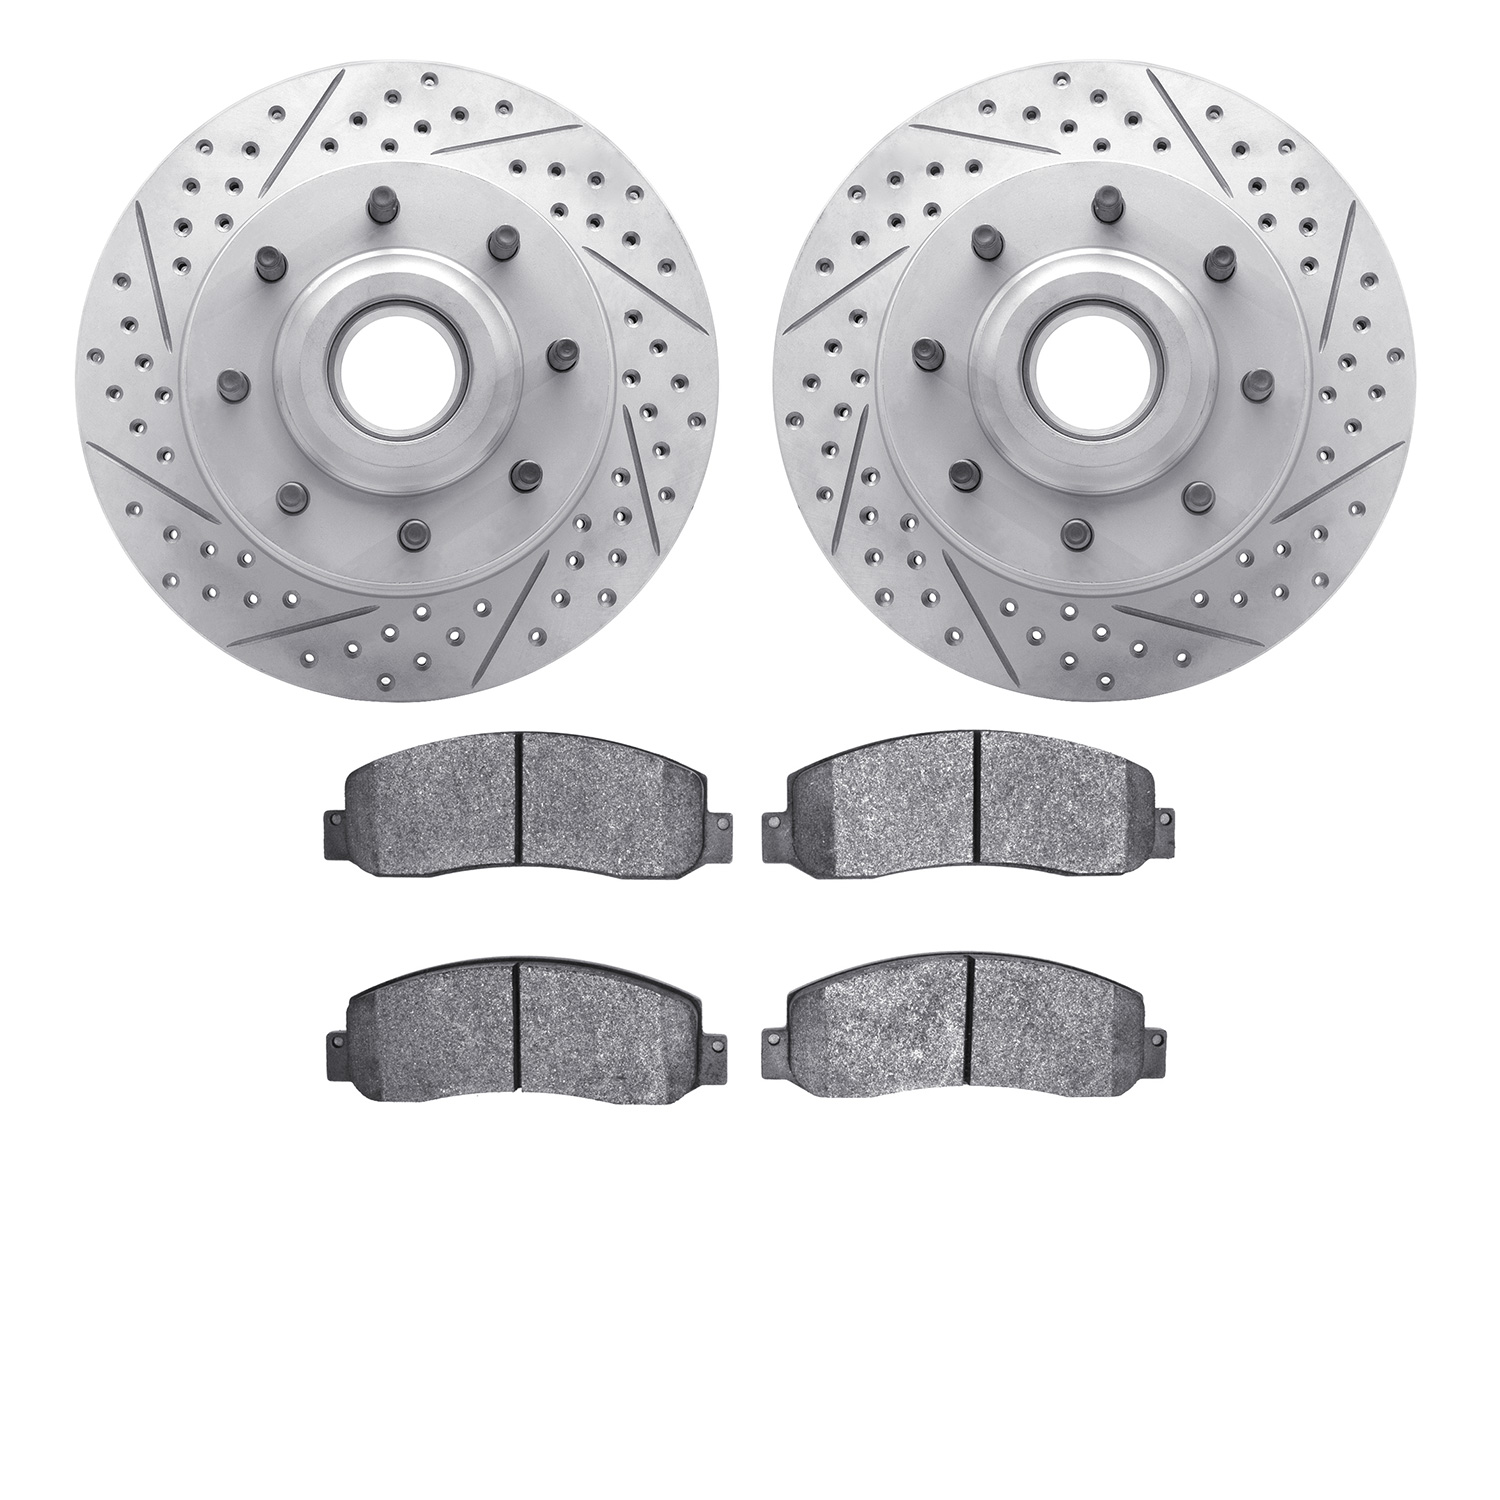 2402-54063 Geoperformance Drilled/Slotted Brake Rotors with Ultimate-Duty Brake Pads Kit, 2006-2012 Ford/Lincoln/Mercury/Mazda,